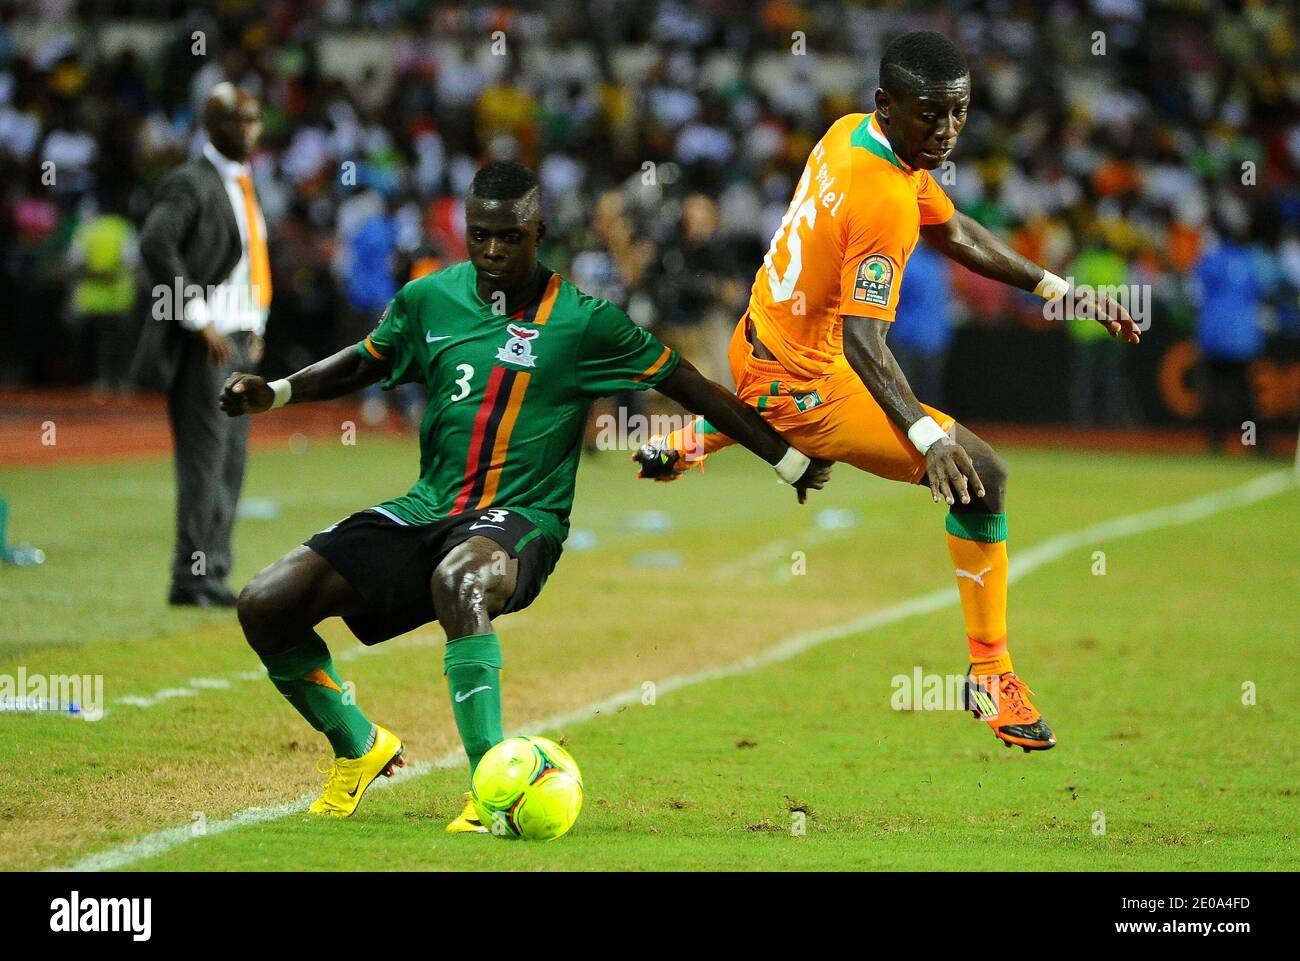 Zambia's Chisamba Lungu and Ivory Coast's Max-Alain Gradel during the 2012 African Cup of Nations Soccer Match, Final, Zambia Vs Ivory Coast in Libreville, Gabon on February 12, 2012. Photo by ABACAPRESS.COM Stock Photo